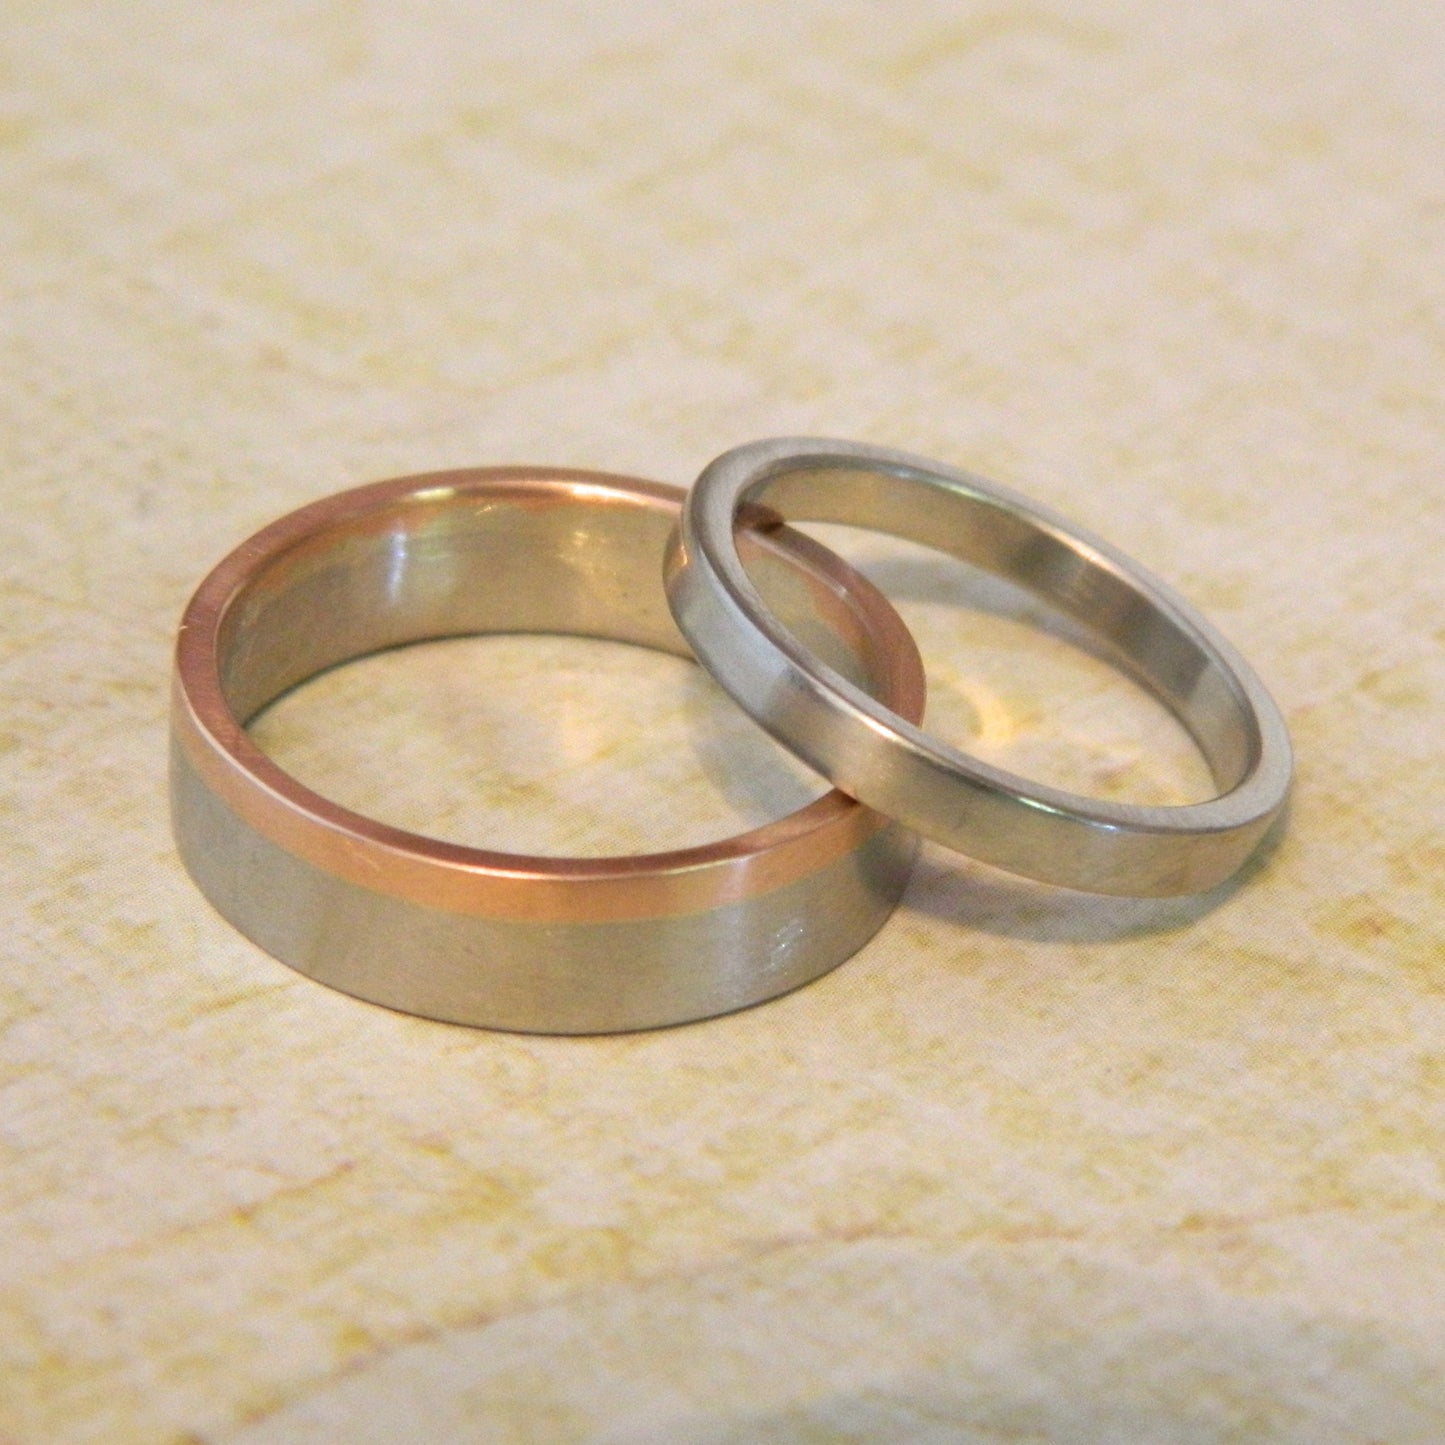 One of a kind wedding rings for Tim and Jessie - e. scott originals